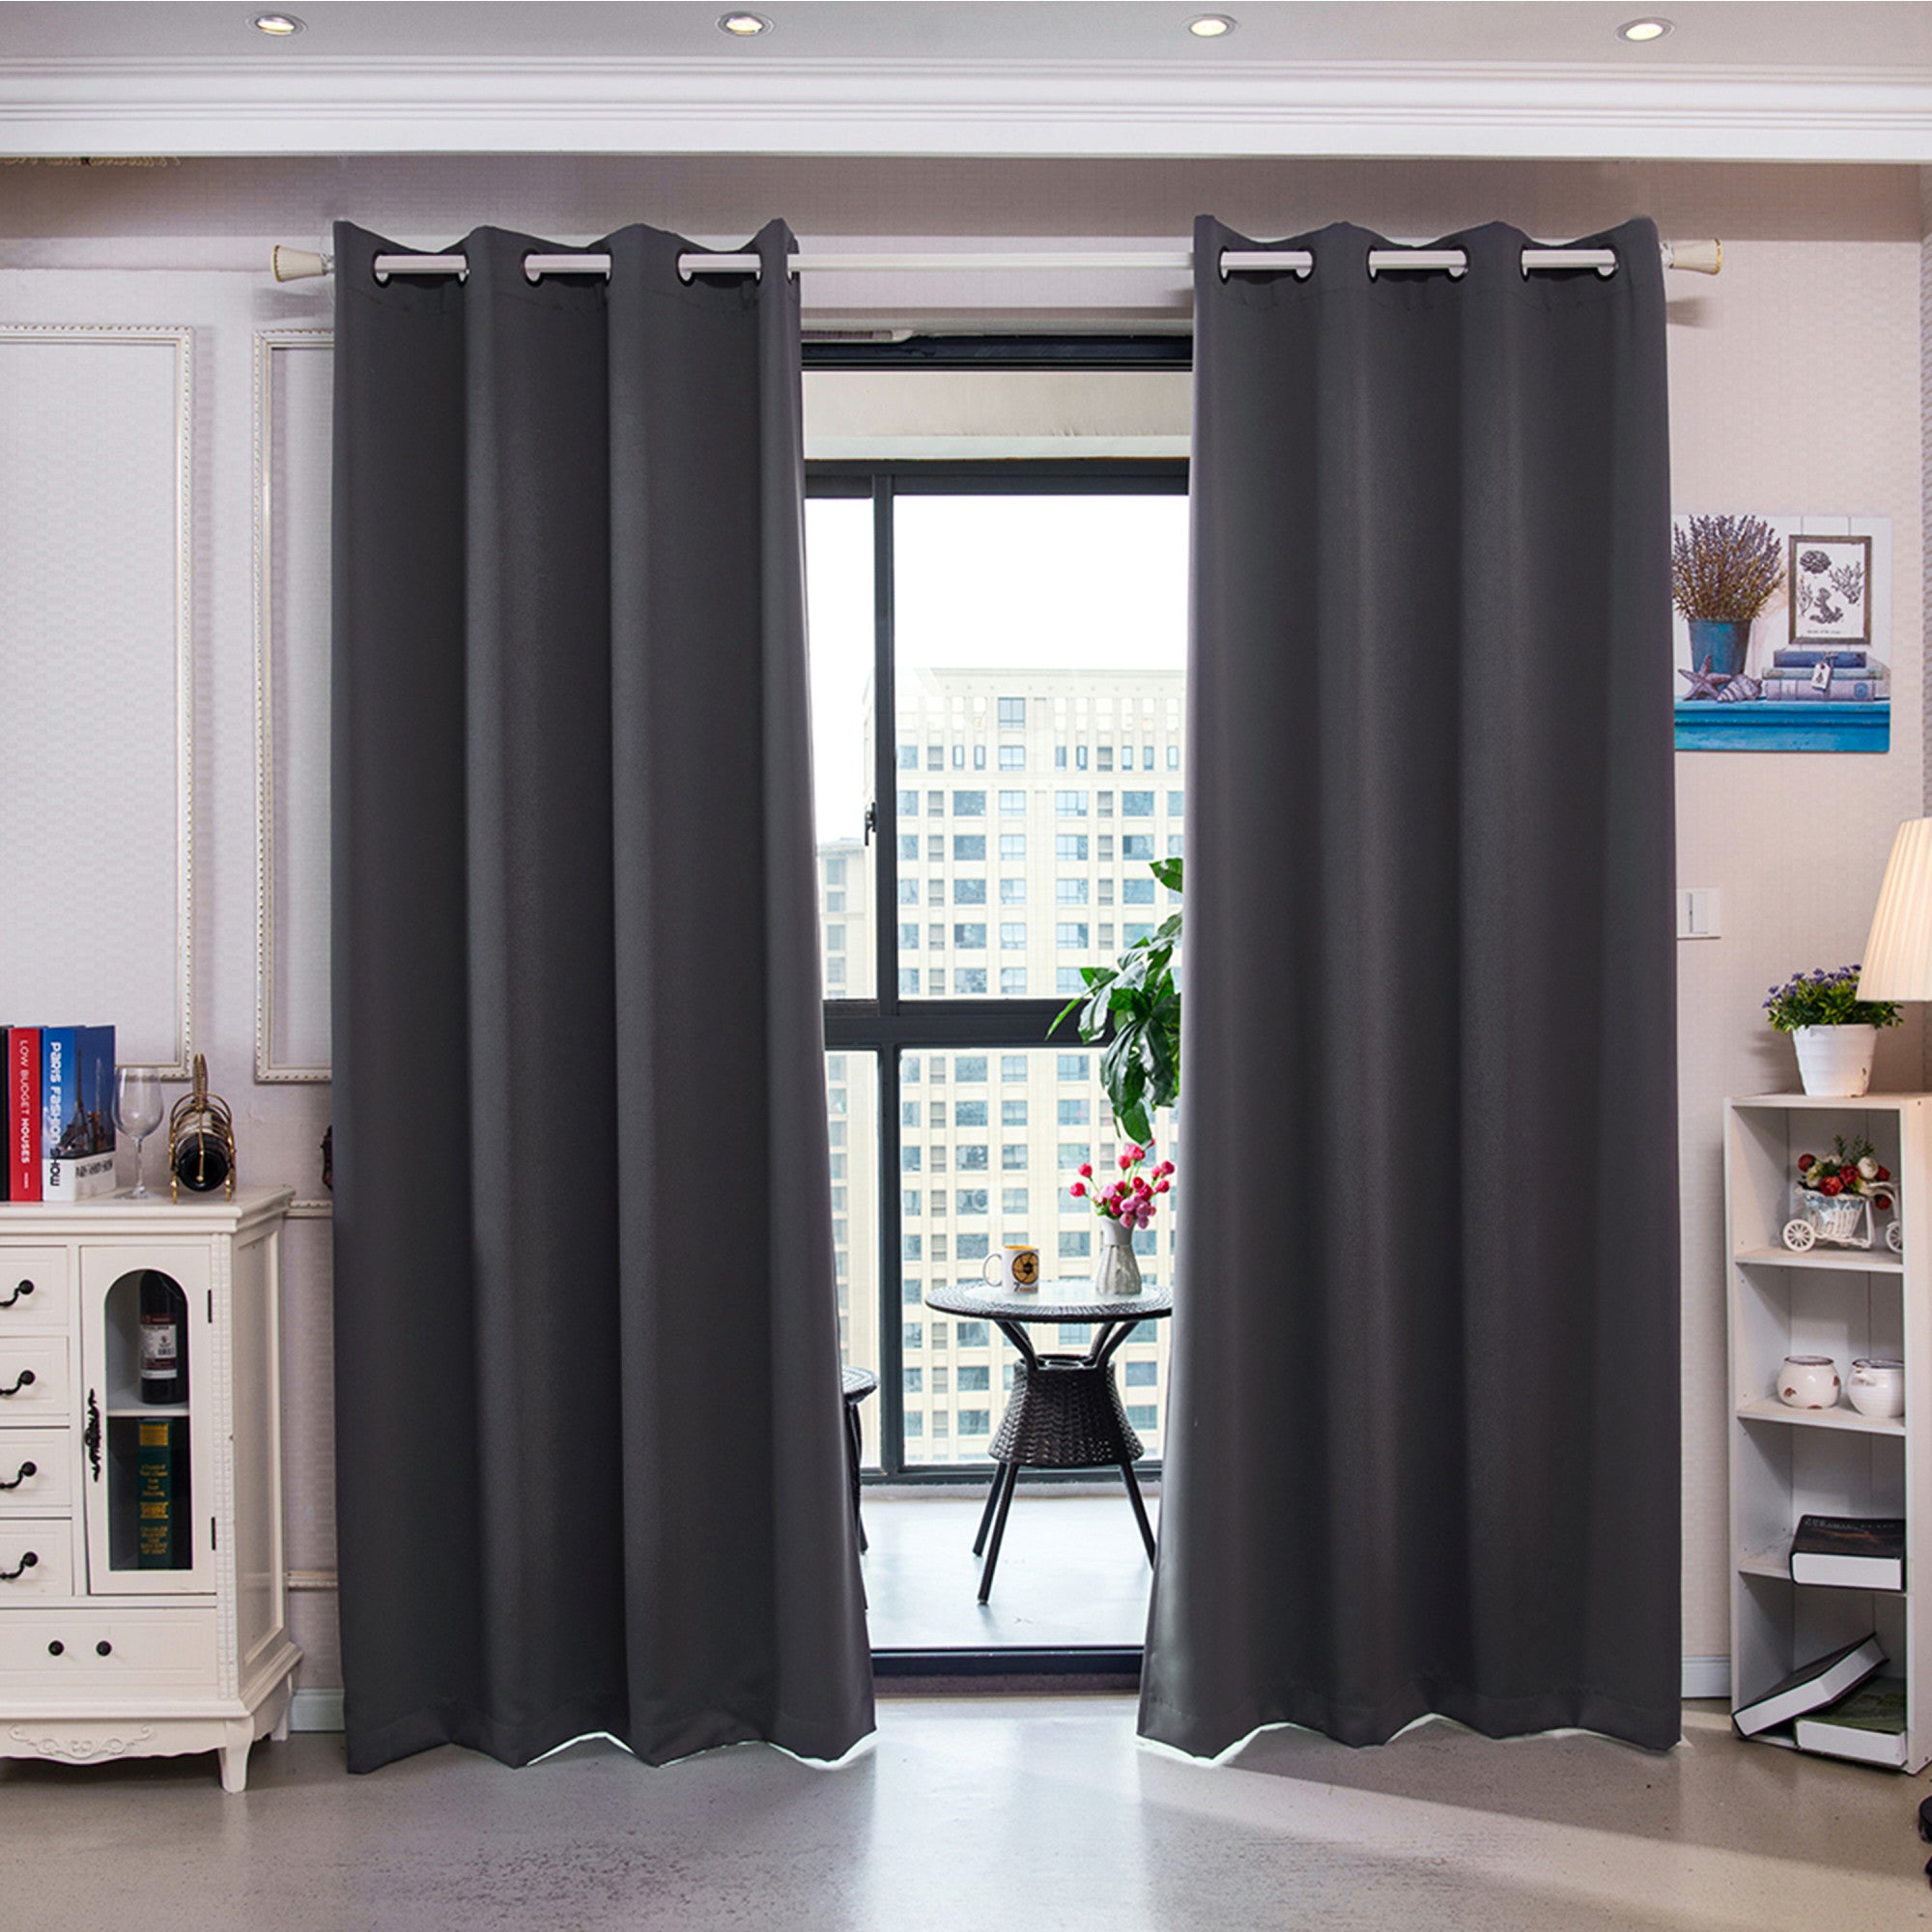 Teamson Home 96" Sparta Premium Solid Insulated Thermal Blackout Window Curtain Panels with Grommets, Dove Gray